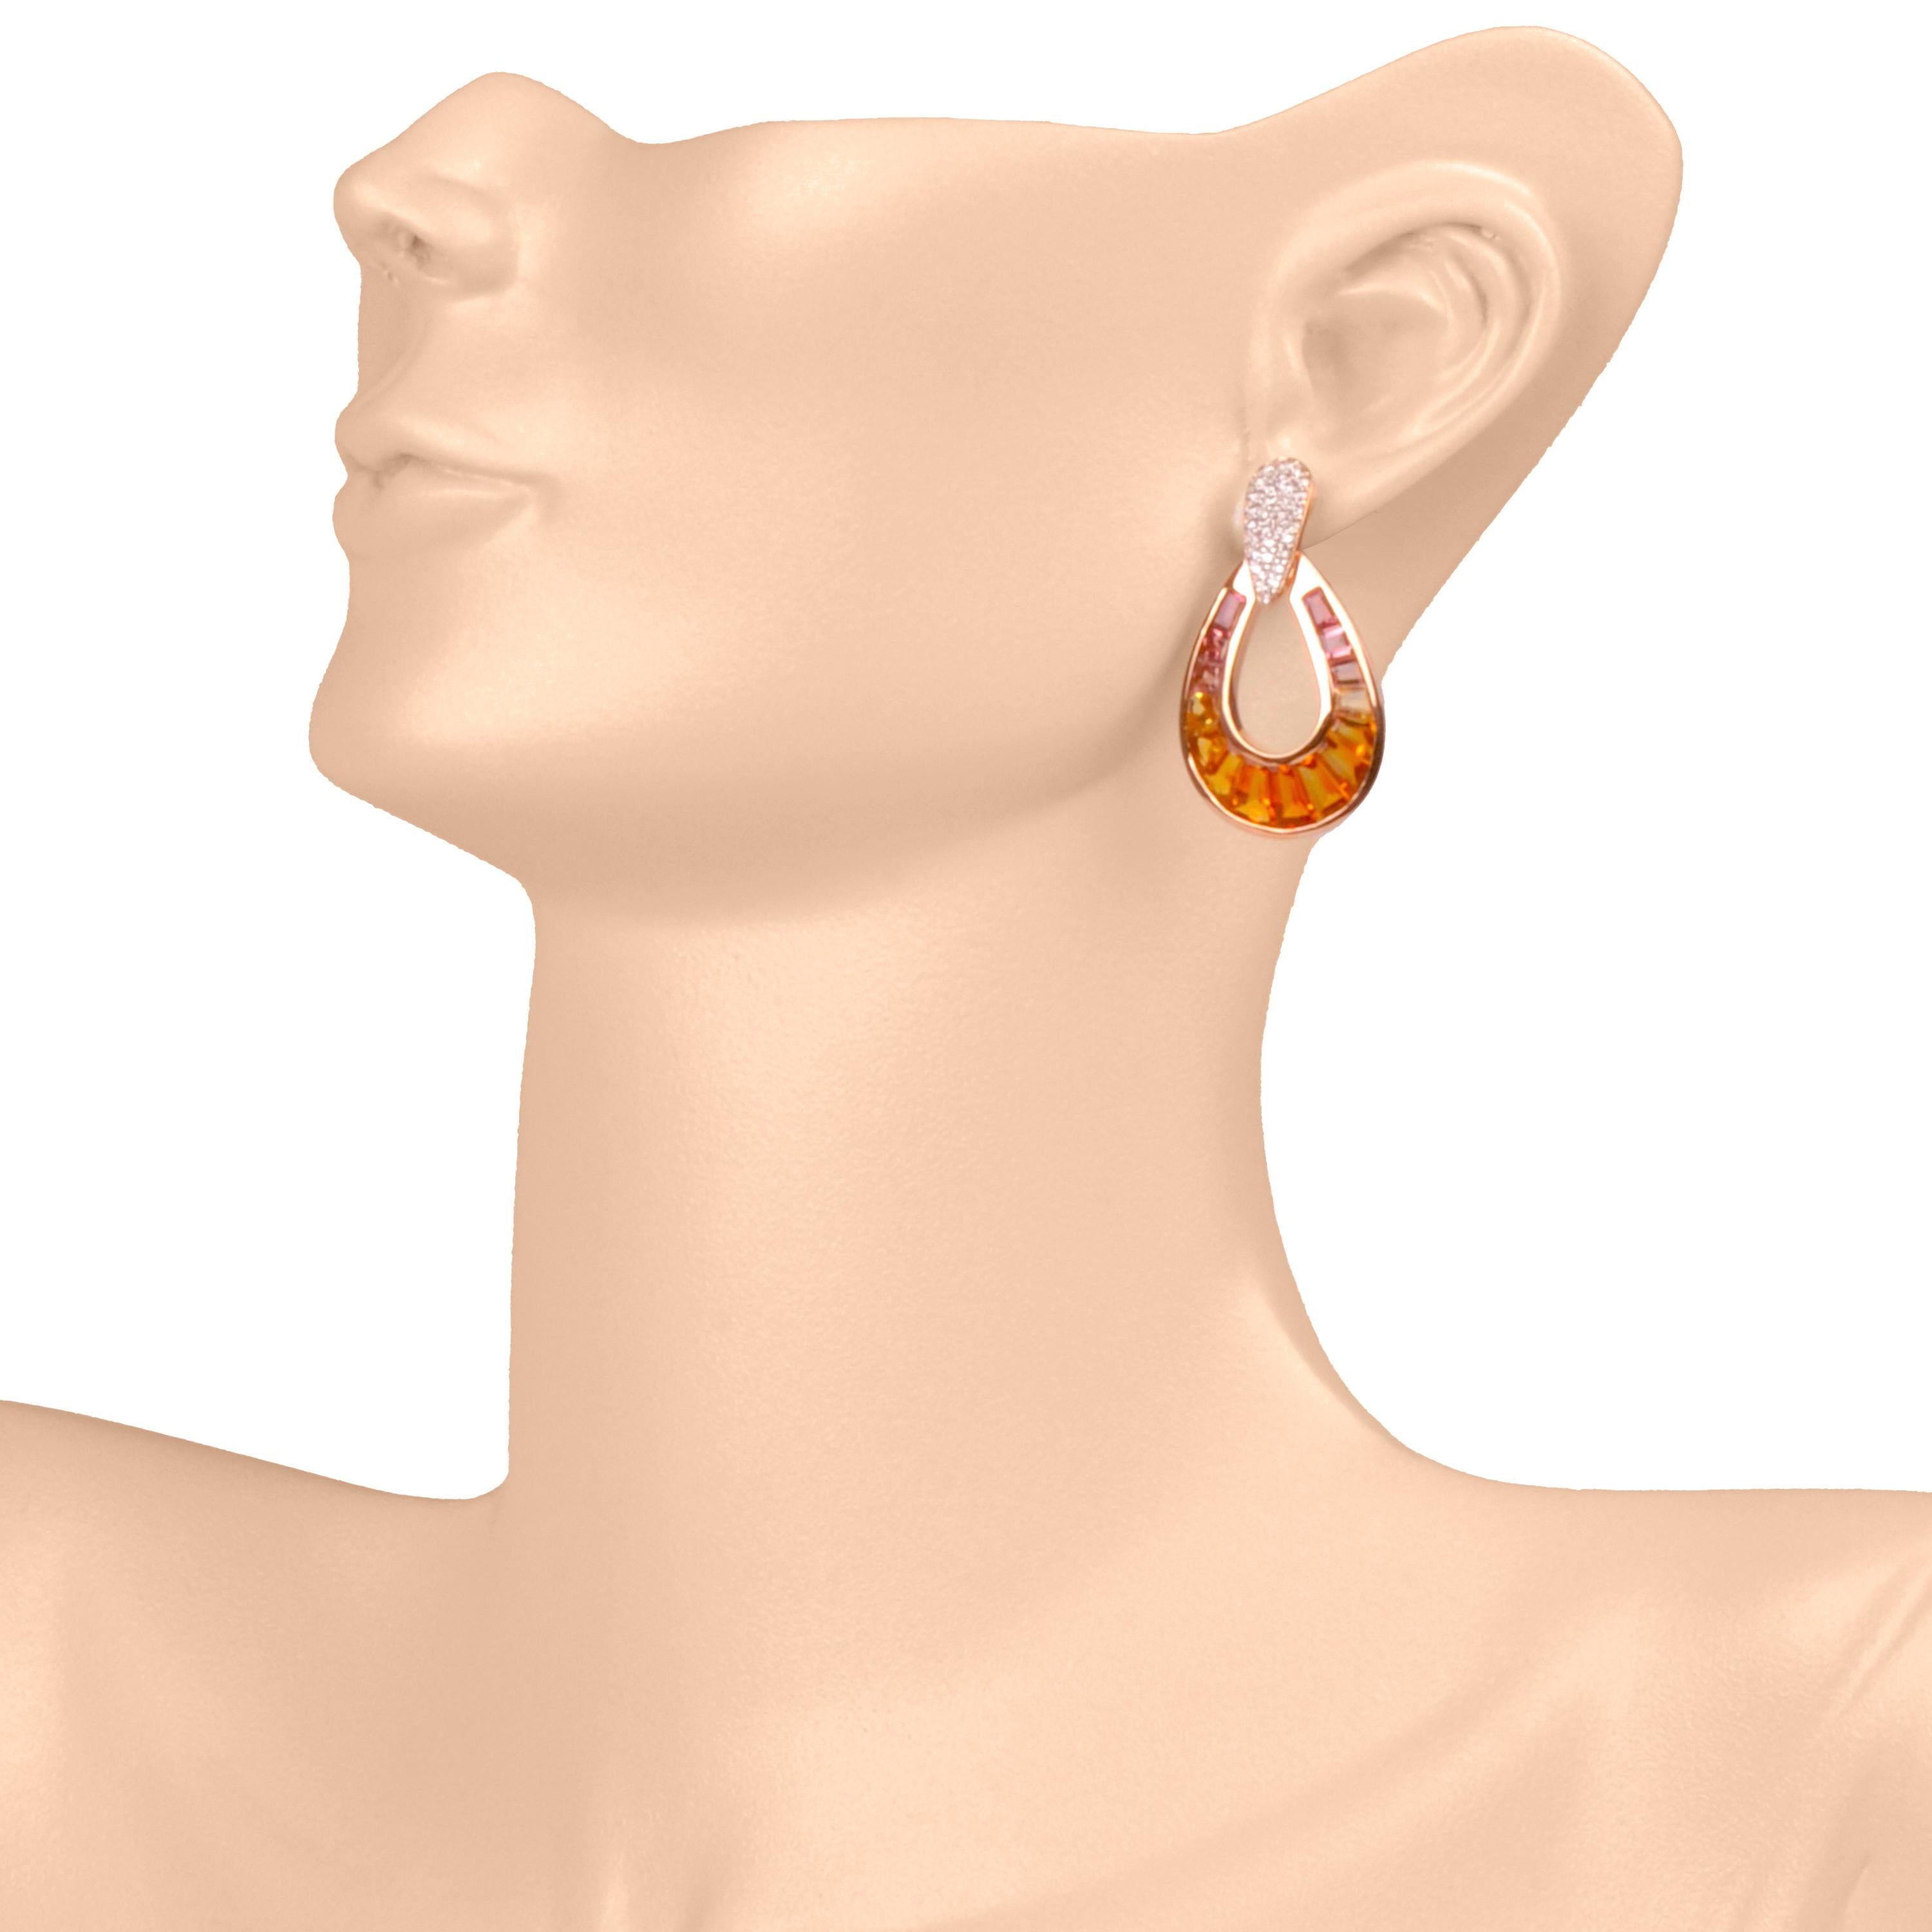 18K Rose Gold Citrine Pink Tourmaline Baguette Diamond Raindrop Earrings- a fusion of elegance and brilliance, designed to captivate.

Handcrafted with precision and using the finest alloys, these earrings embody our commitment to craftsmanship. The